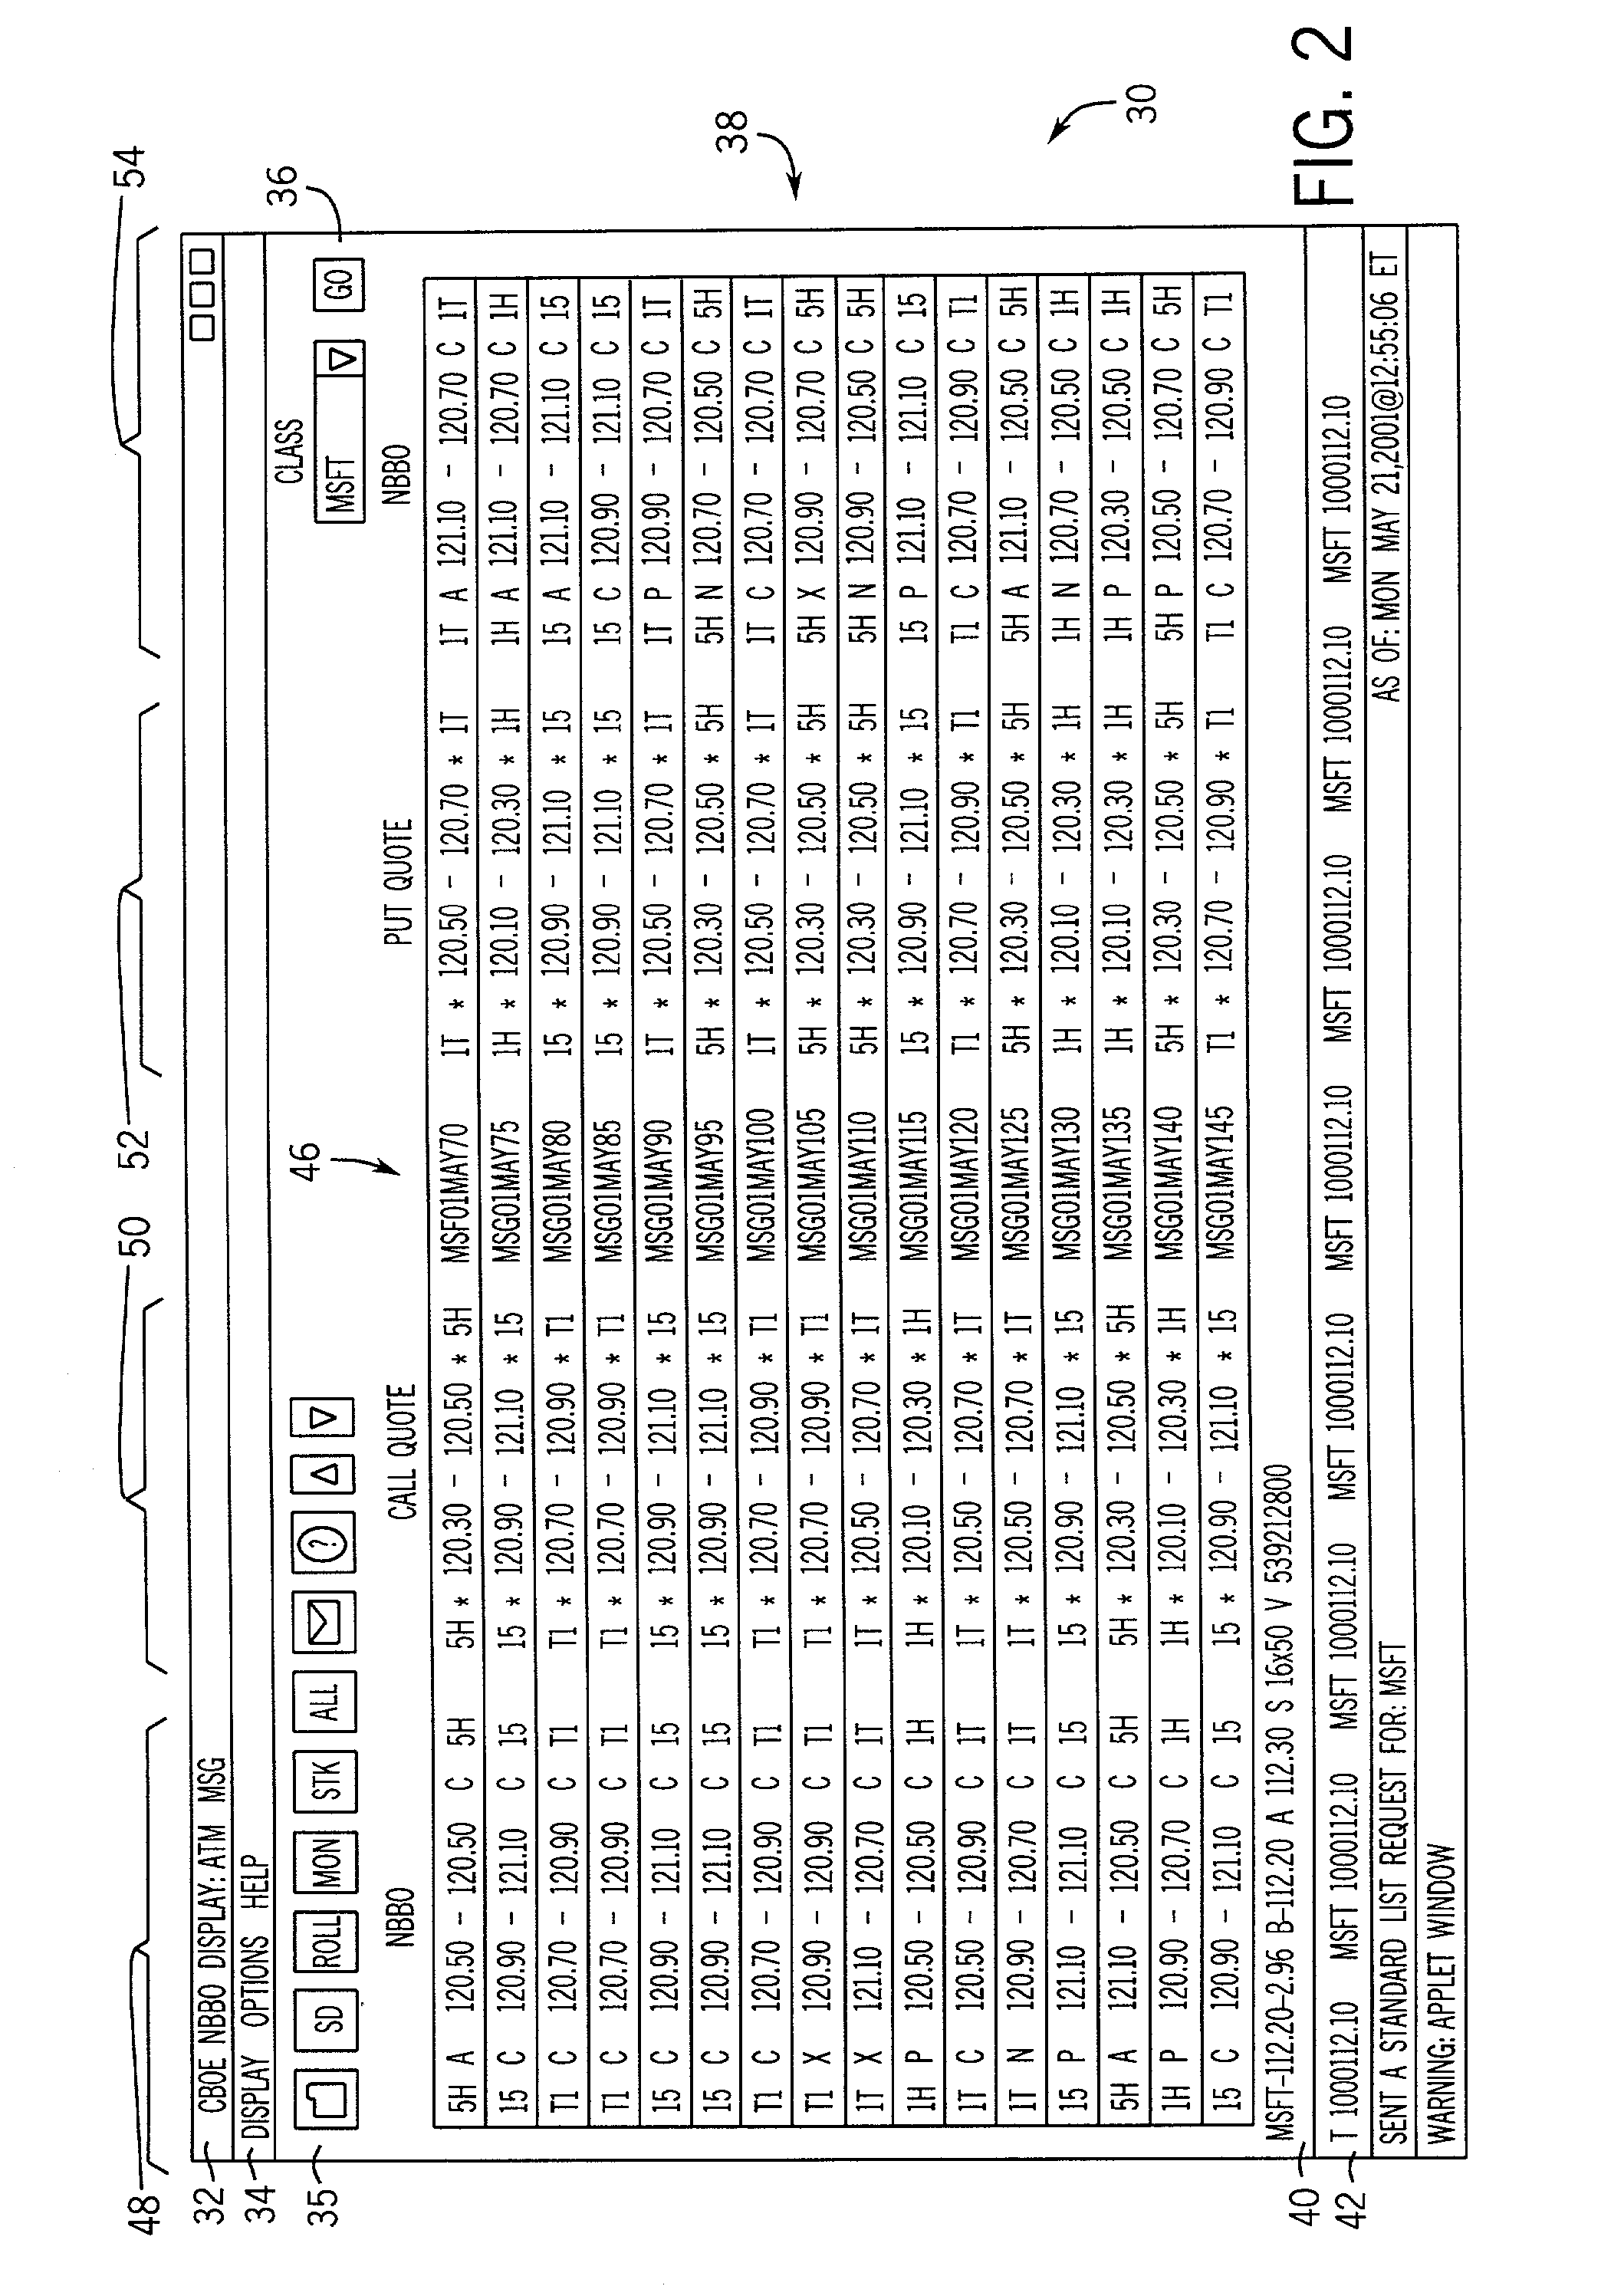 System and method for displaying option market information